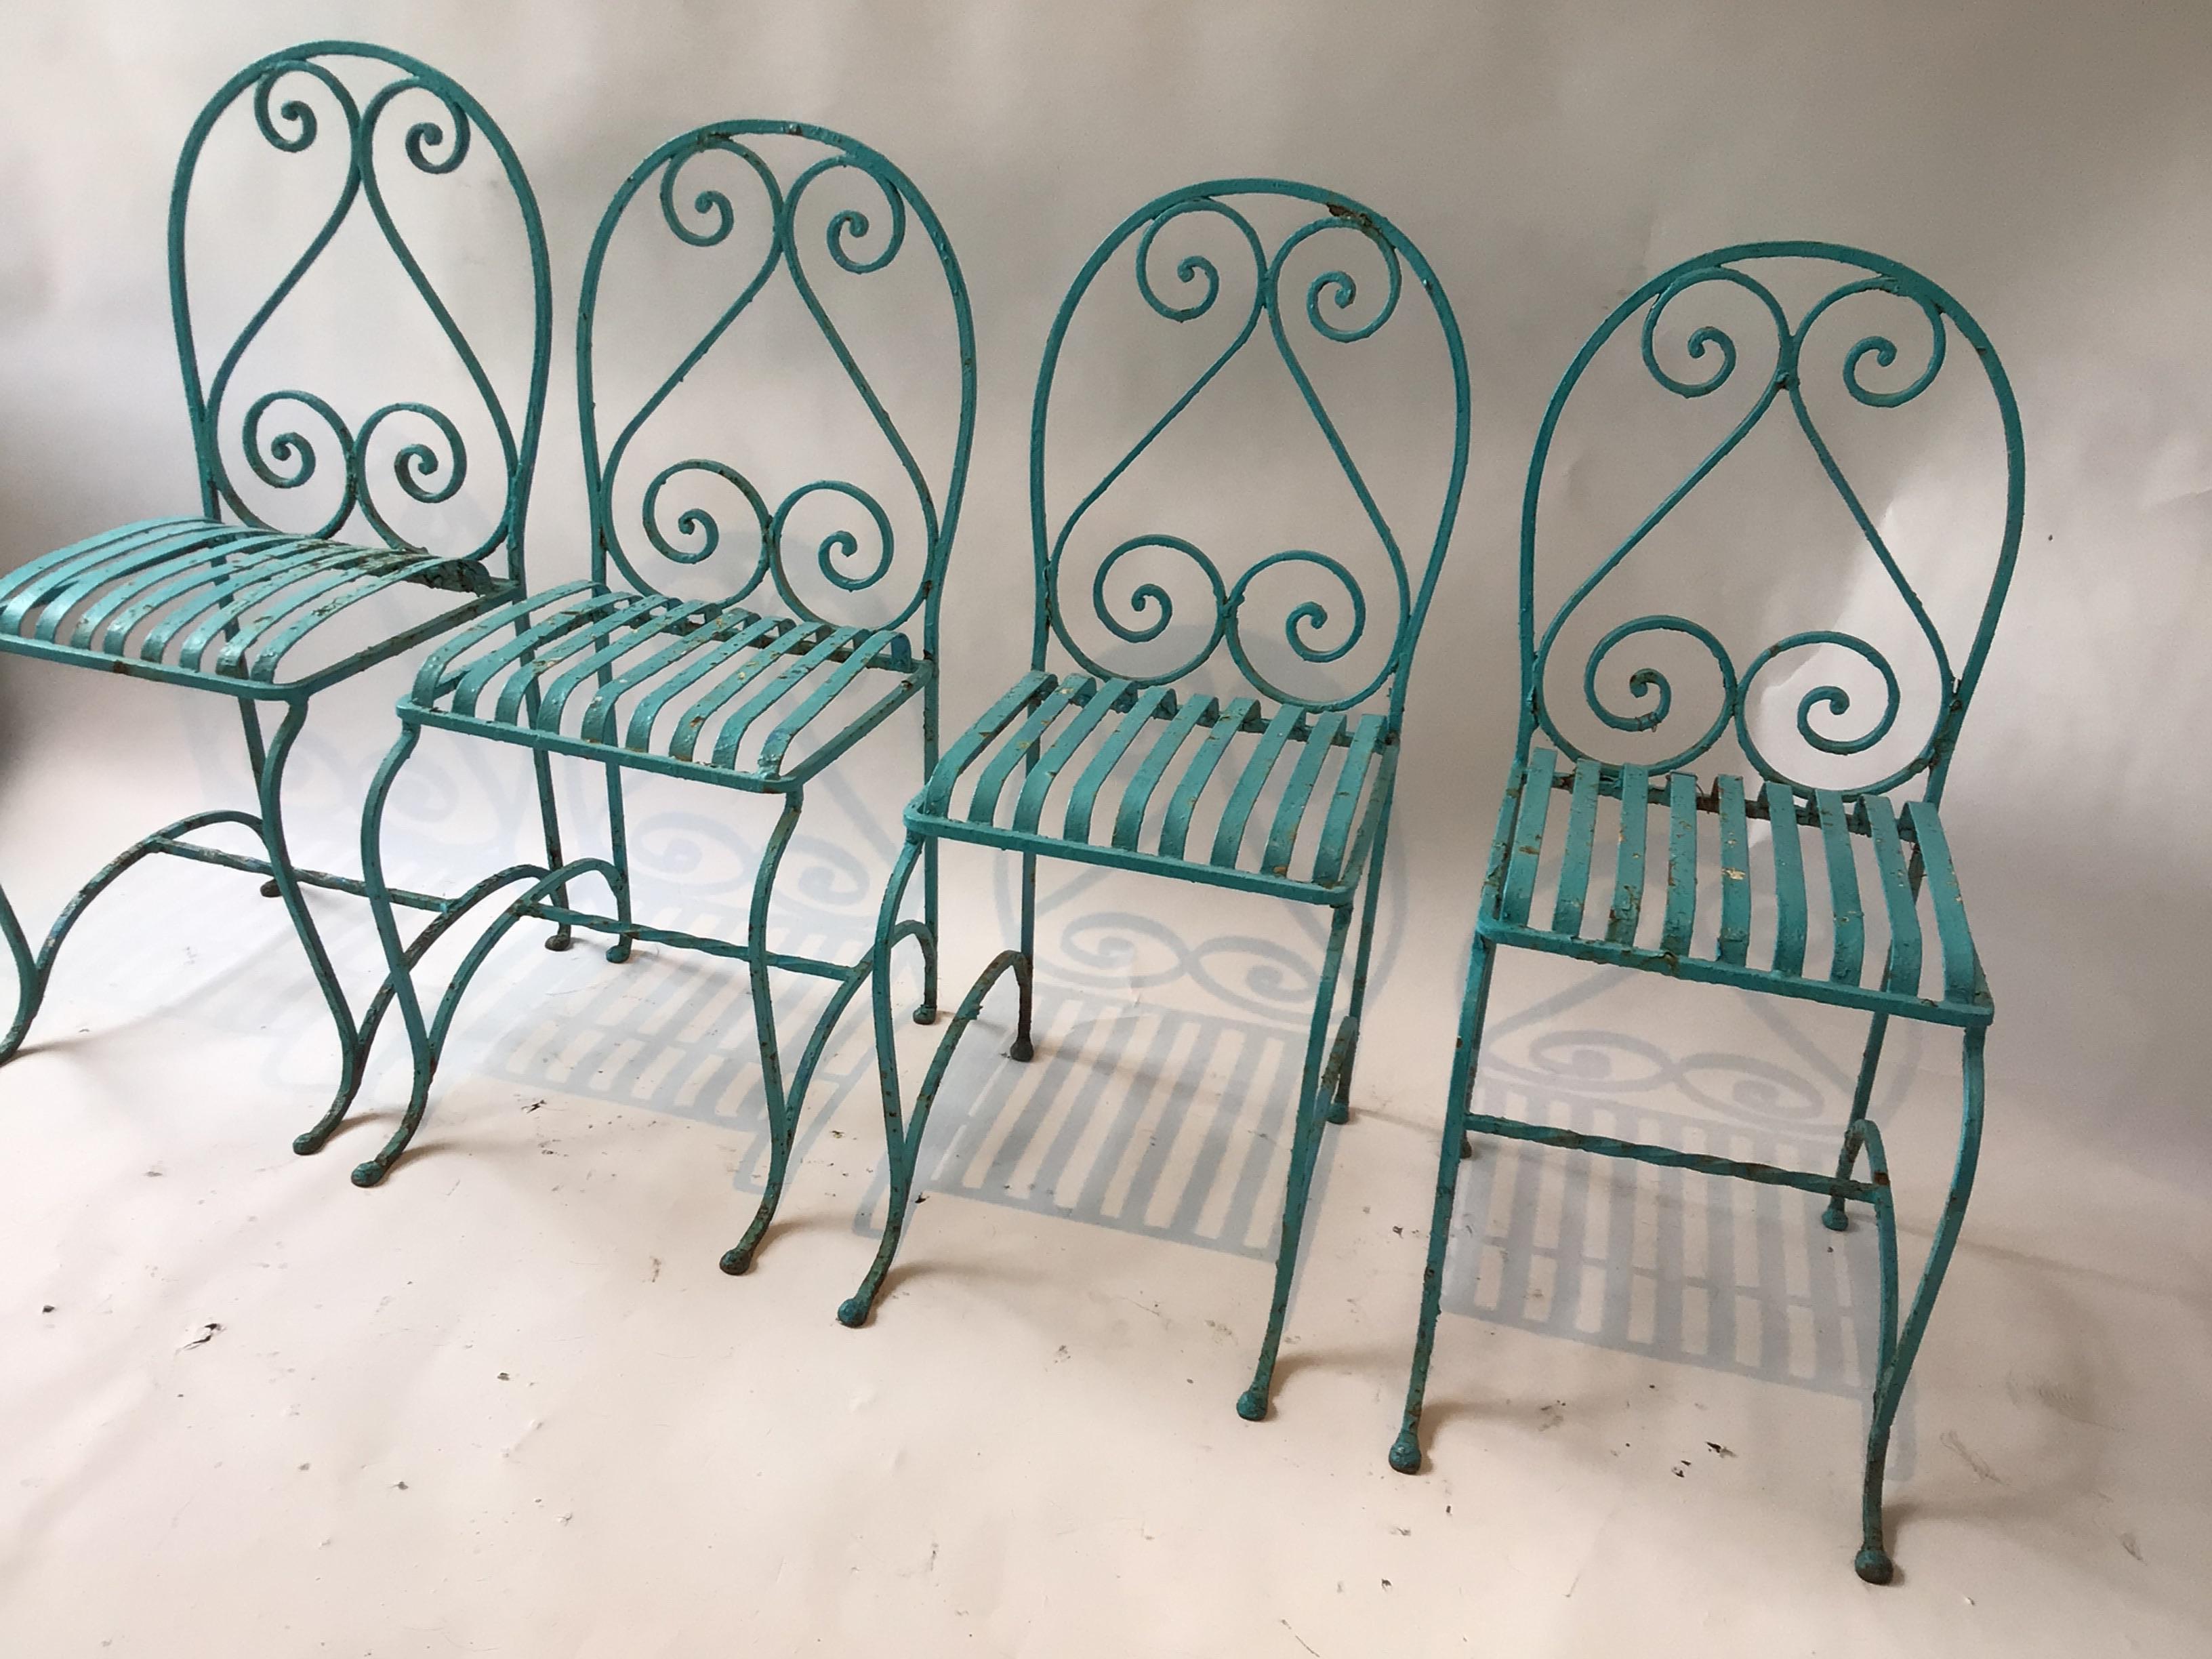 Set of 4 French 1930s Iron garden chairs with spring seats. One chair is missing the lower cross bar.